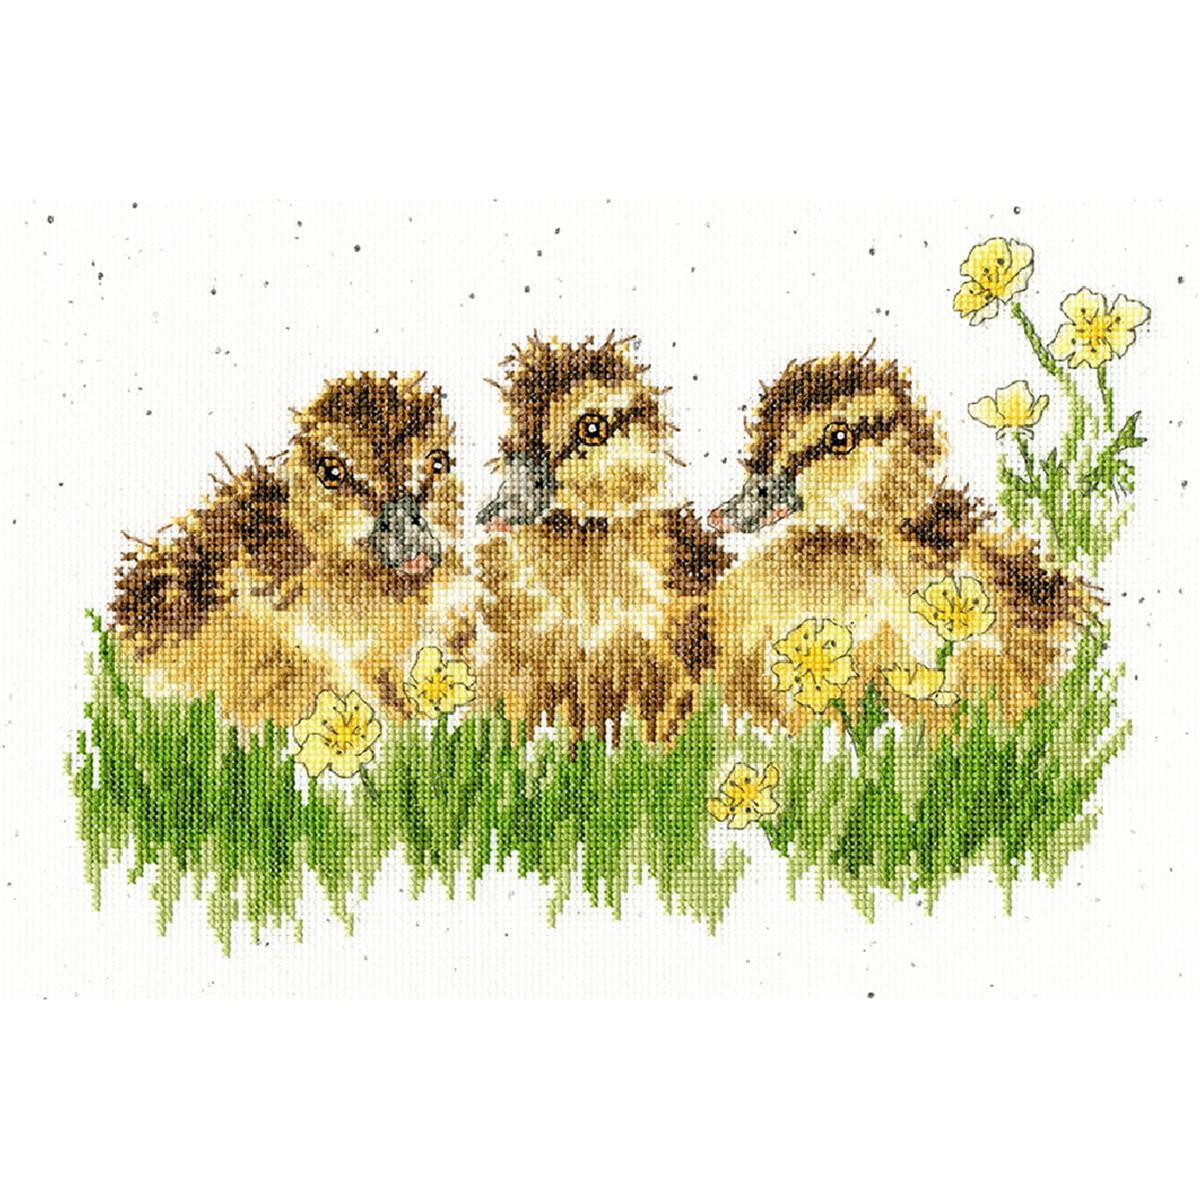 A cross-stitch depiction of three ducklings resting among...